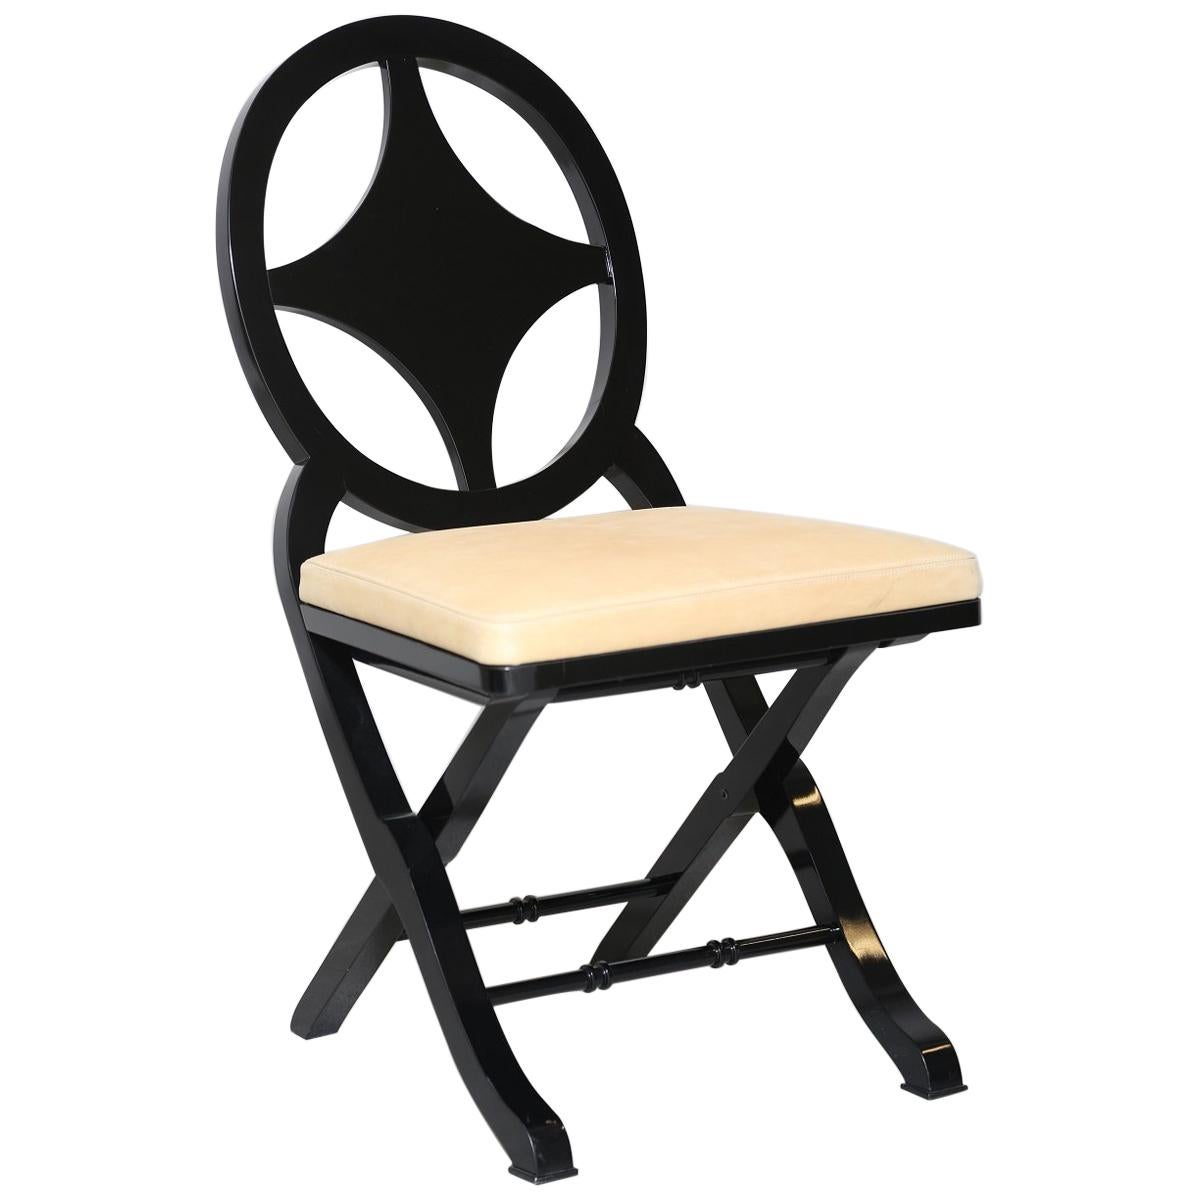 Pinto Paris Madeira Folding Chair Black with Tan Cushion, Made in France For Sale